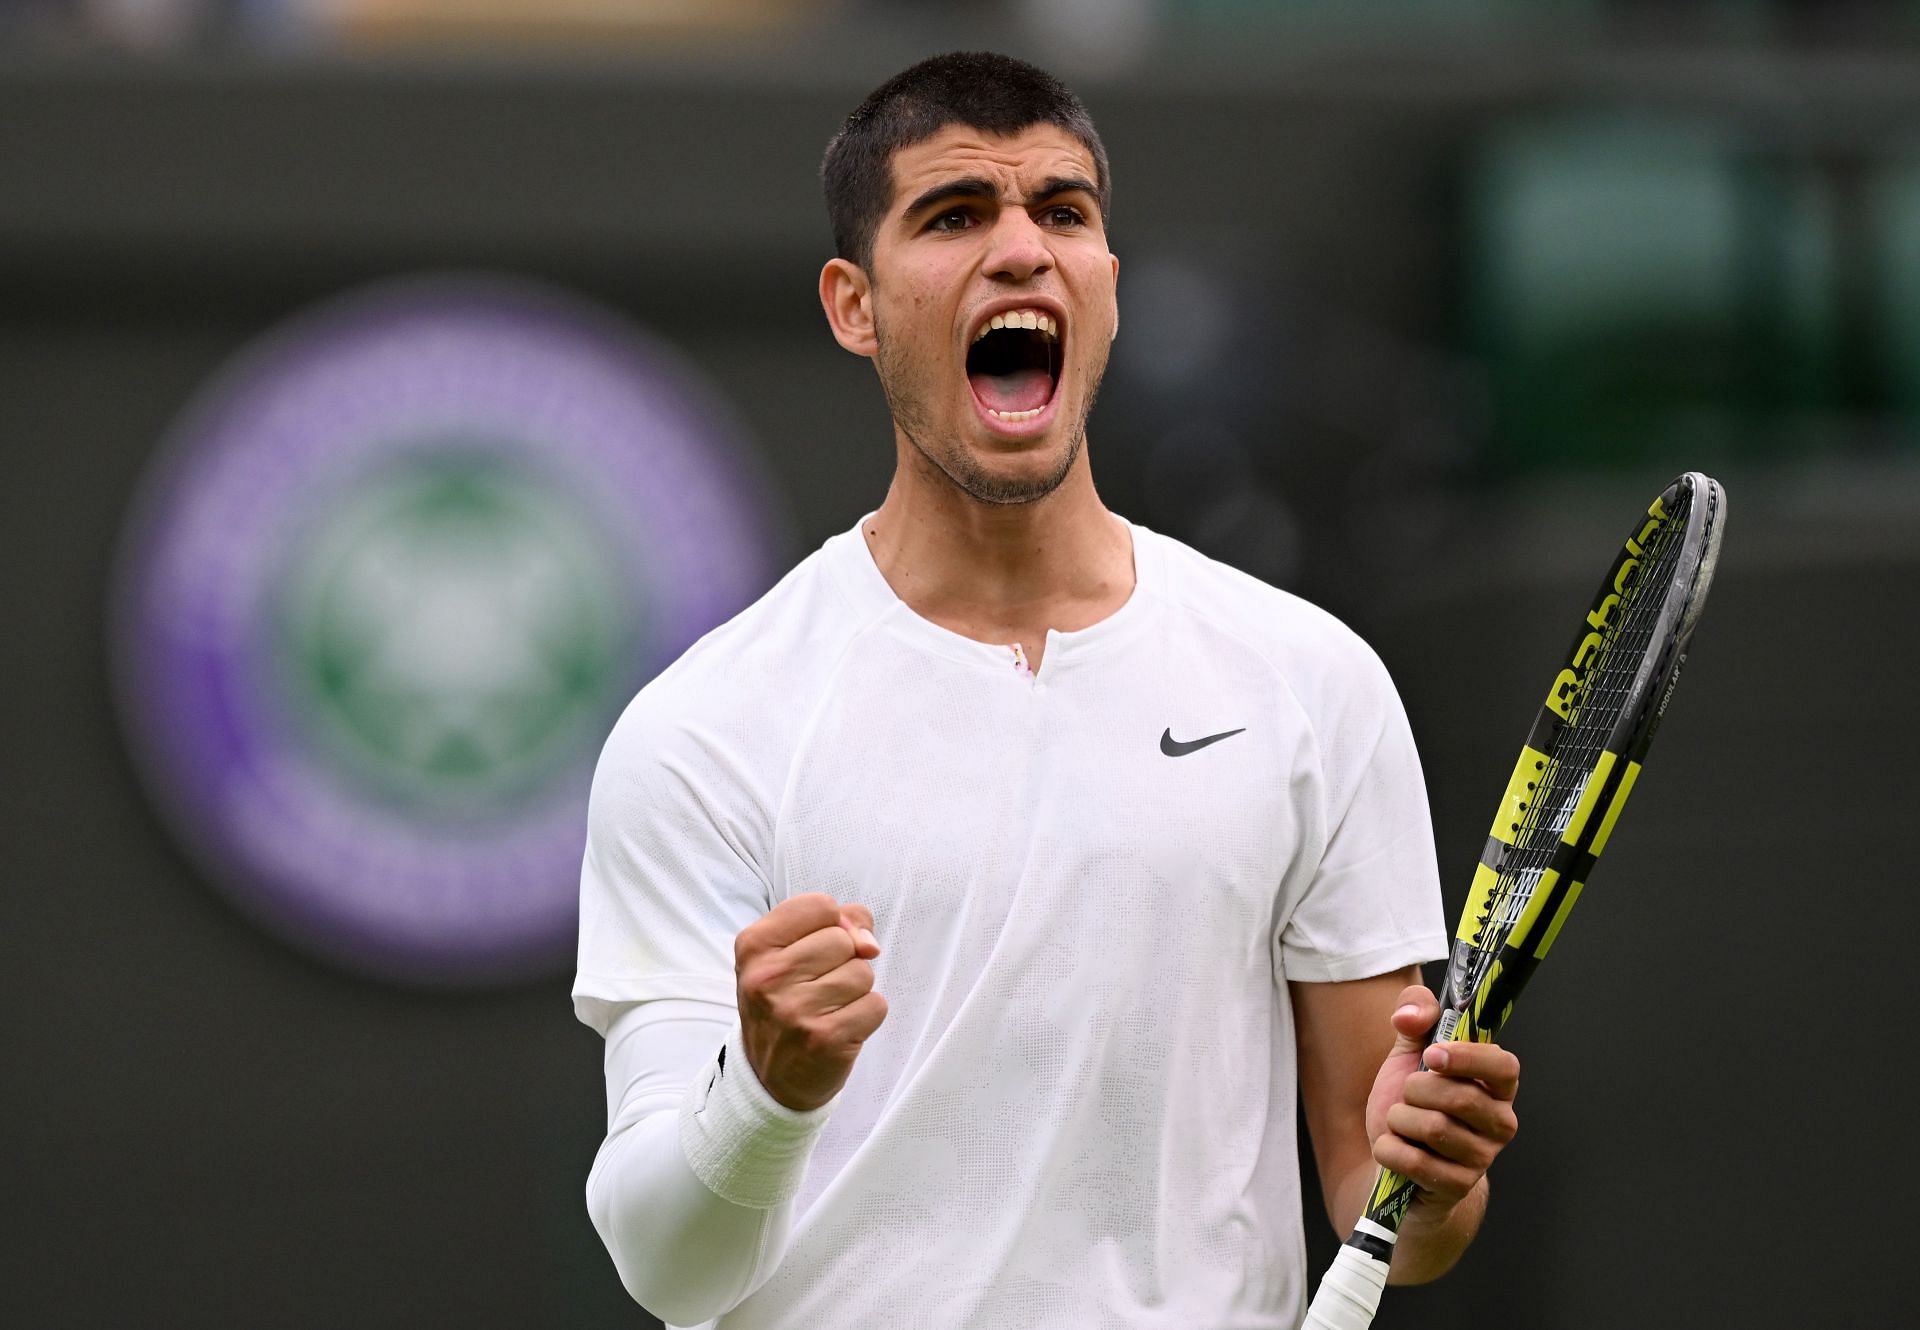 Carlos Alcarazs next match Opponent, venue, live streaming and schedule Wimbledon 2022, Round 2